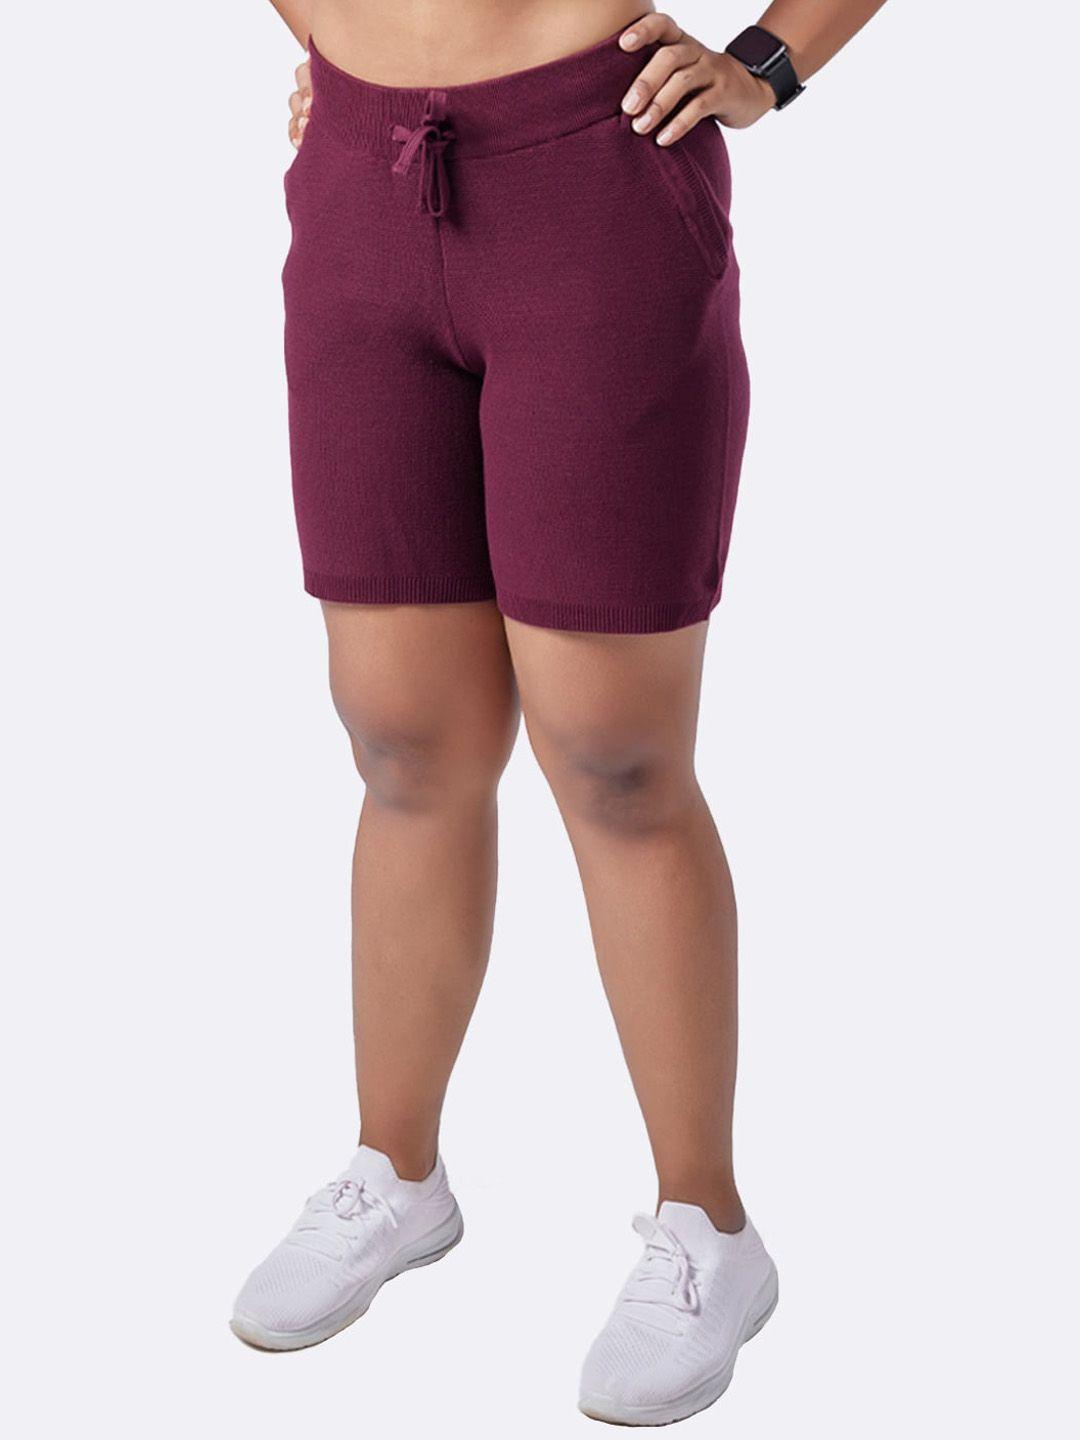 blissclub-women-burgundy-move-all-day-shorts-with-2-deep-side-pocket